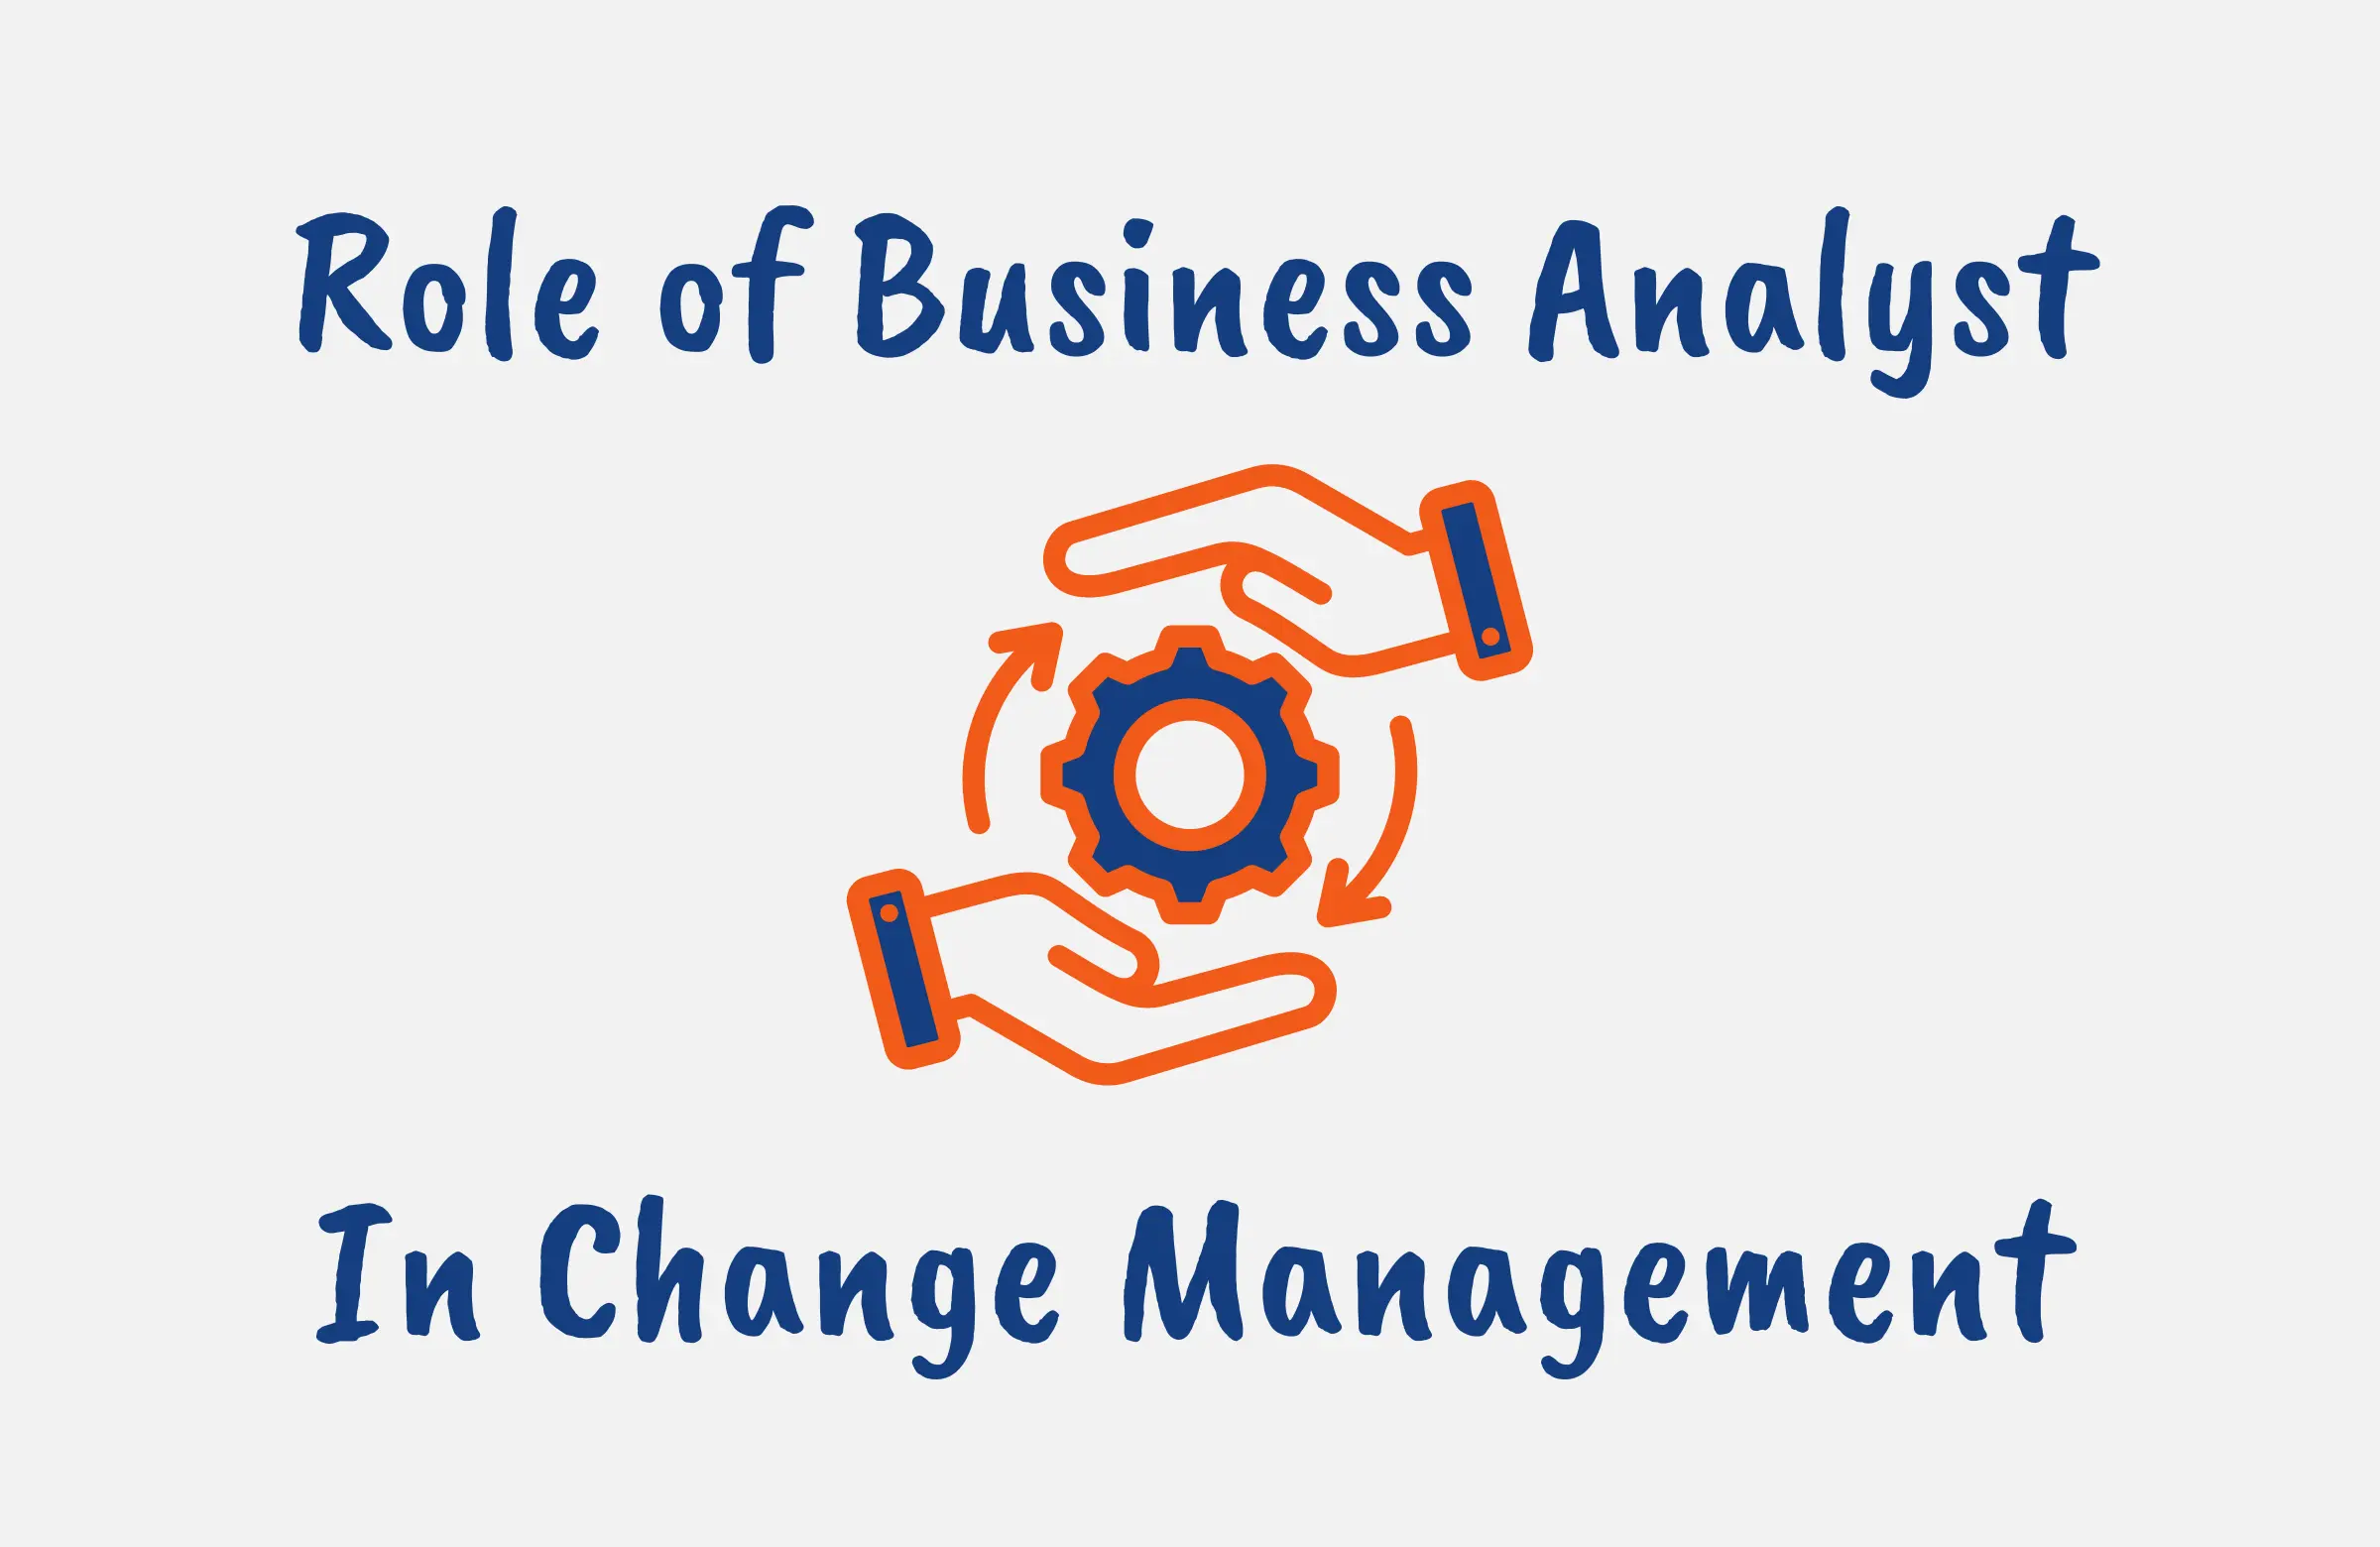 The Role of Business Analyst in Change Management